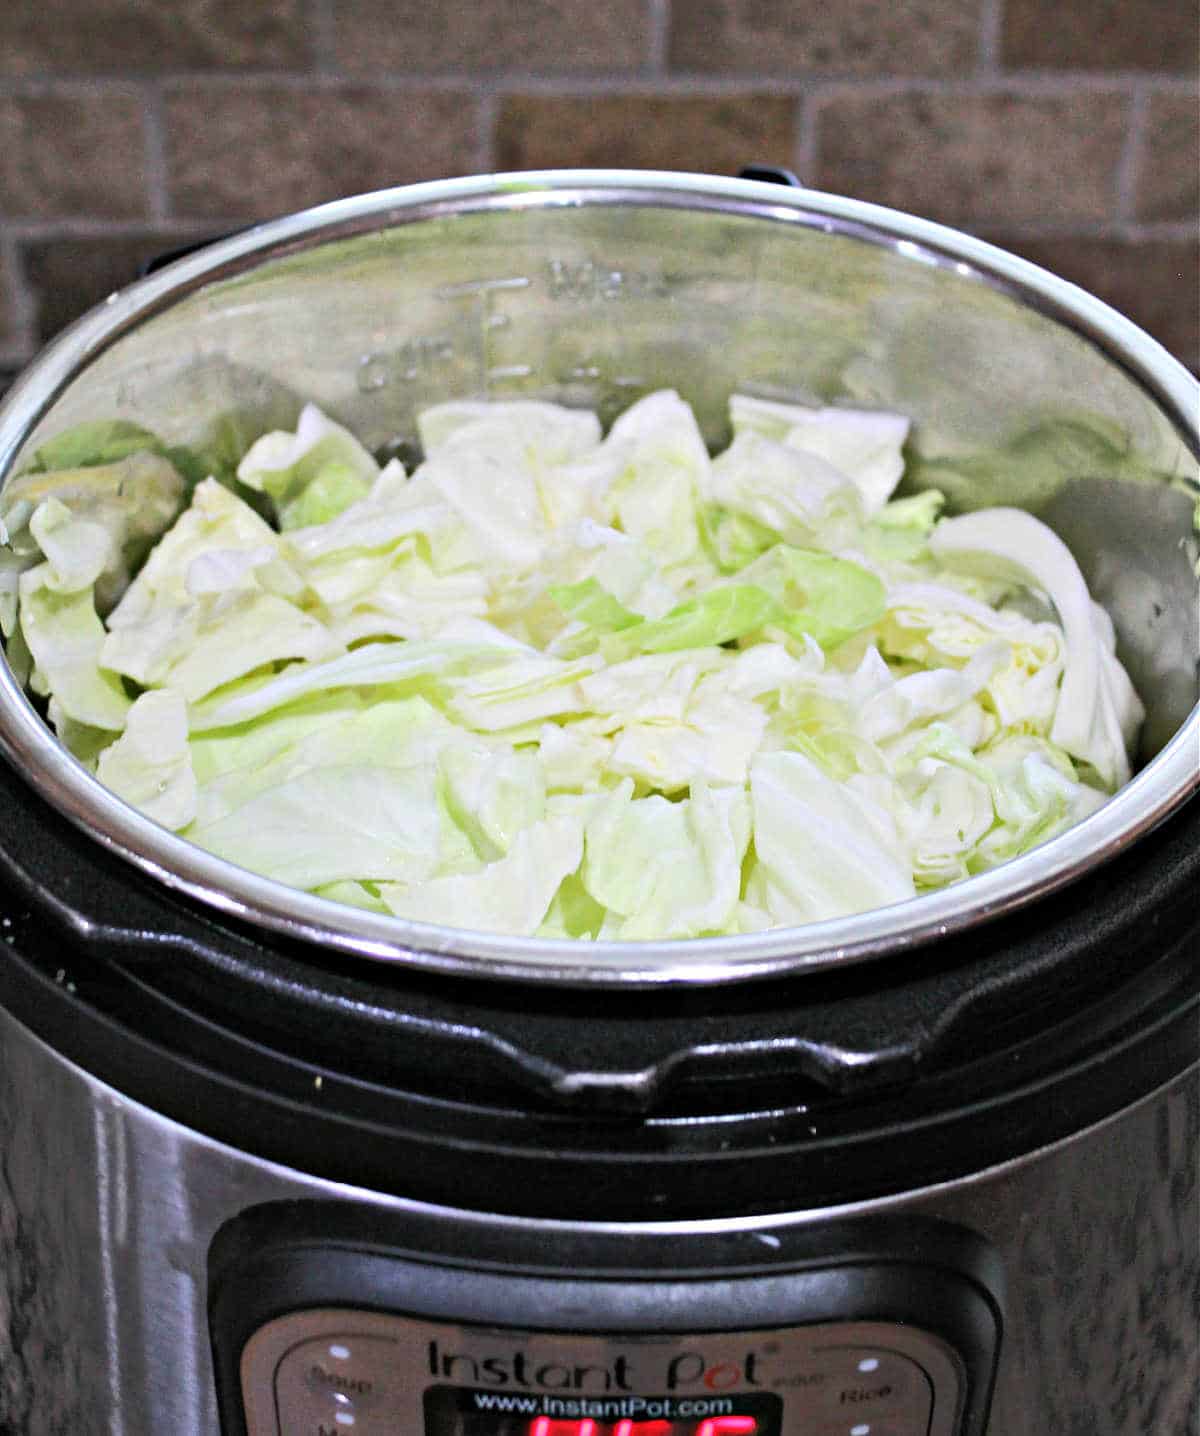 all ingredients in instant pot ready to cook. The cabbage is on top.